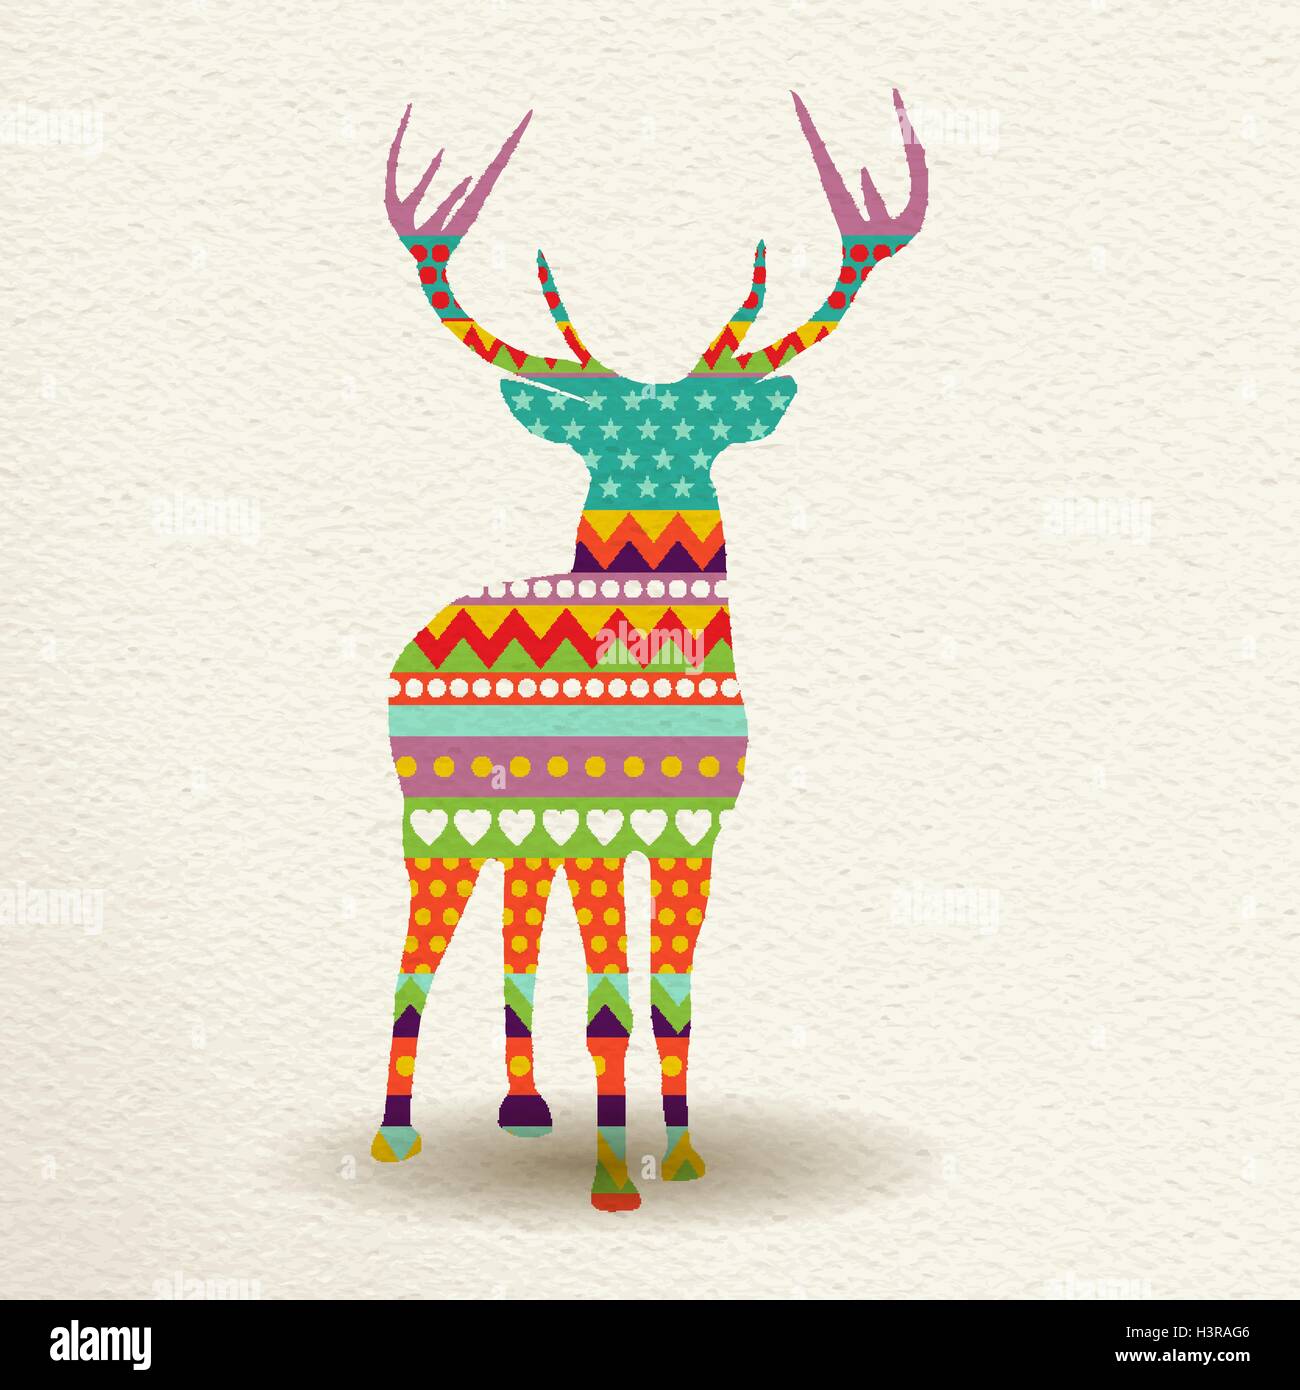 Merry Christmas reindeer in fun happy colors with abstract geometric shapes, concept holiday design. EPS10 vector. Stock Vector